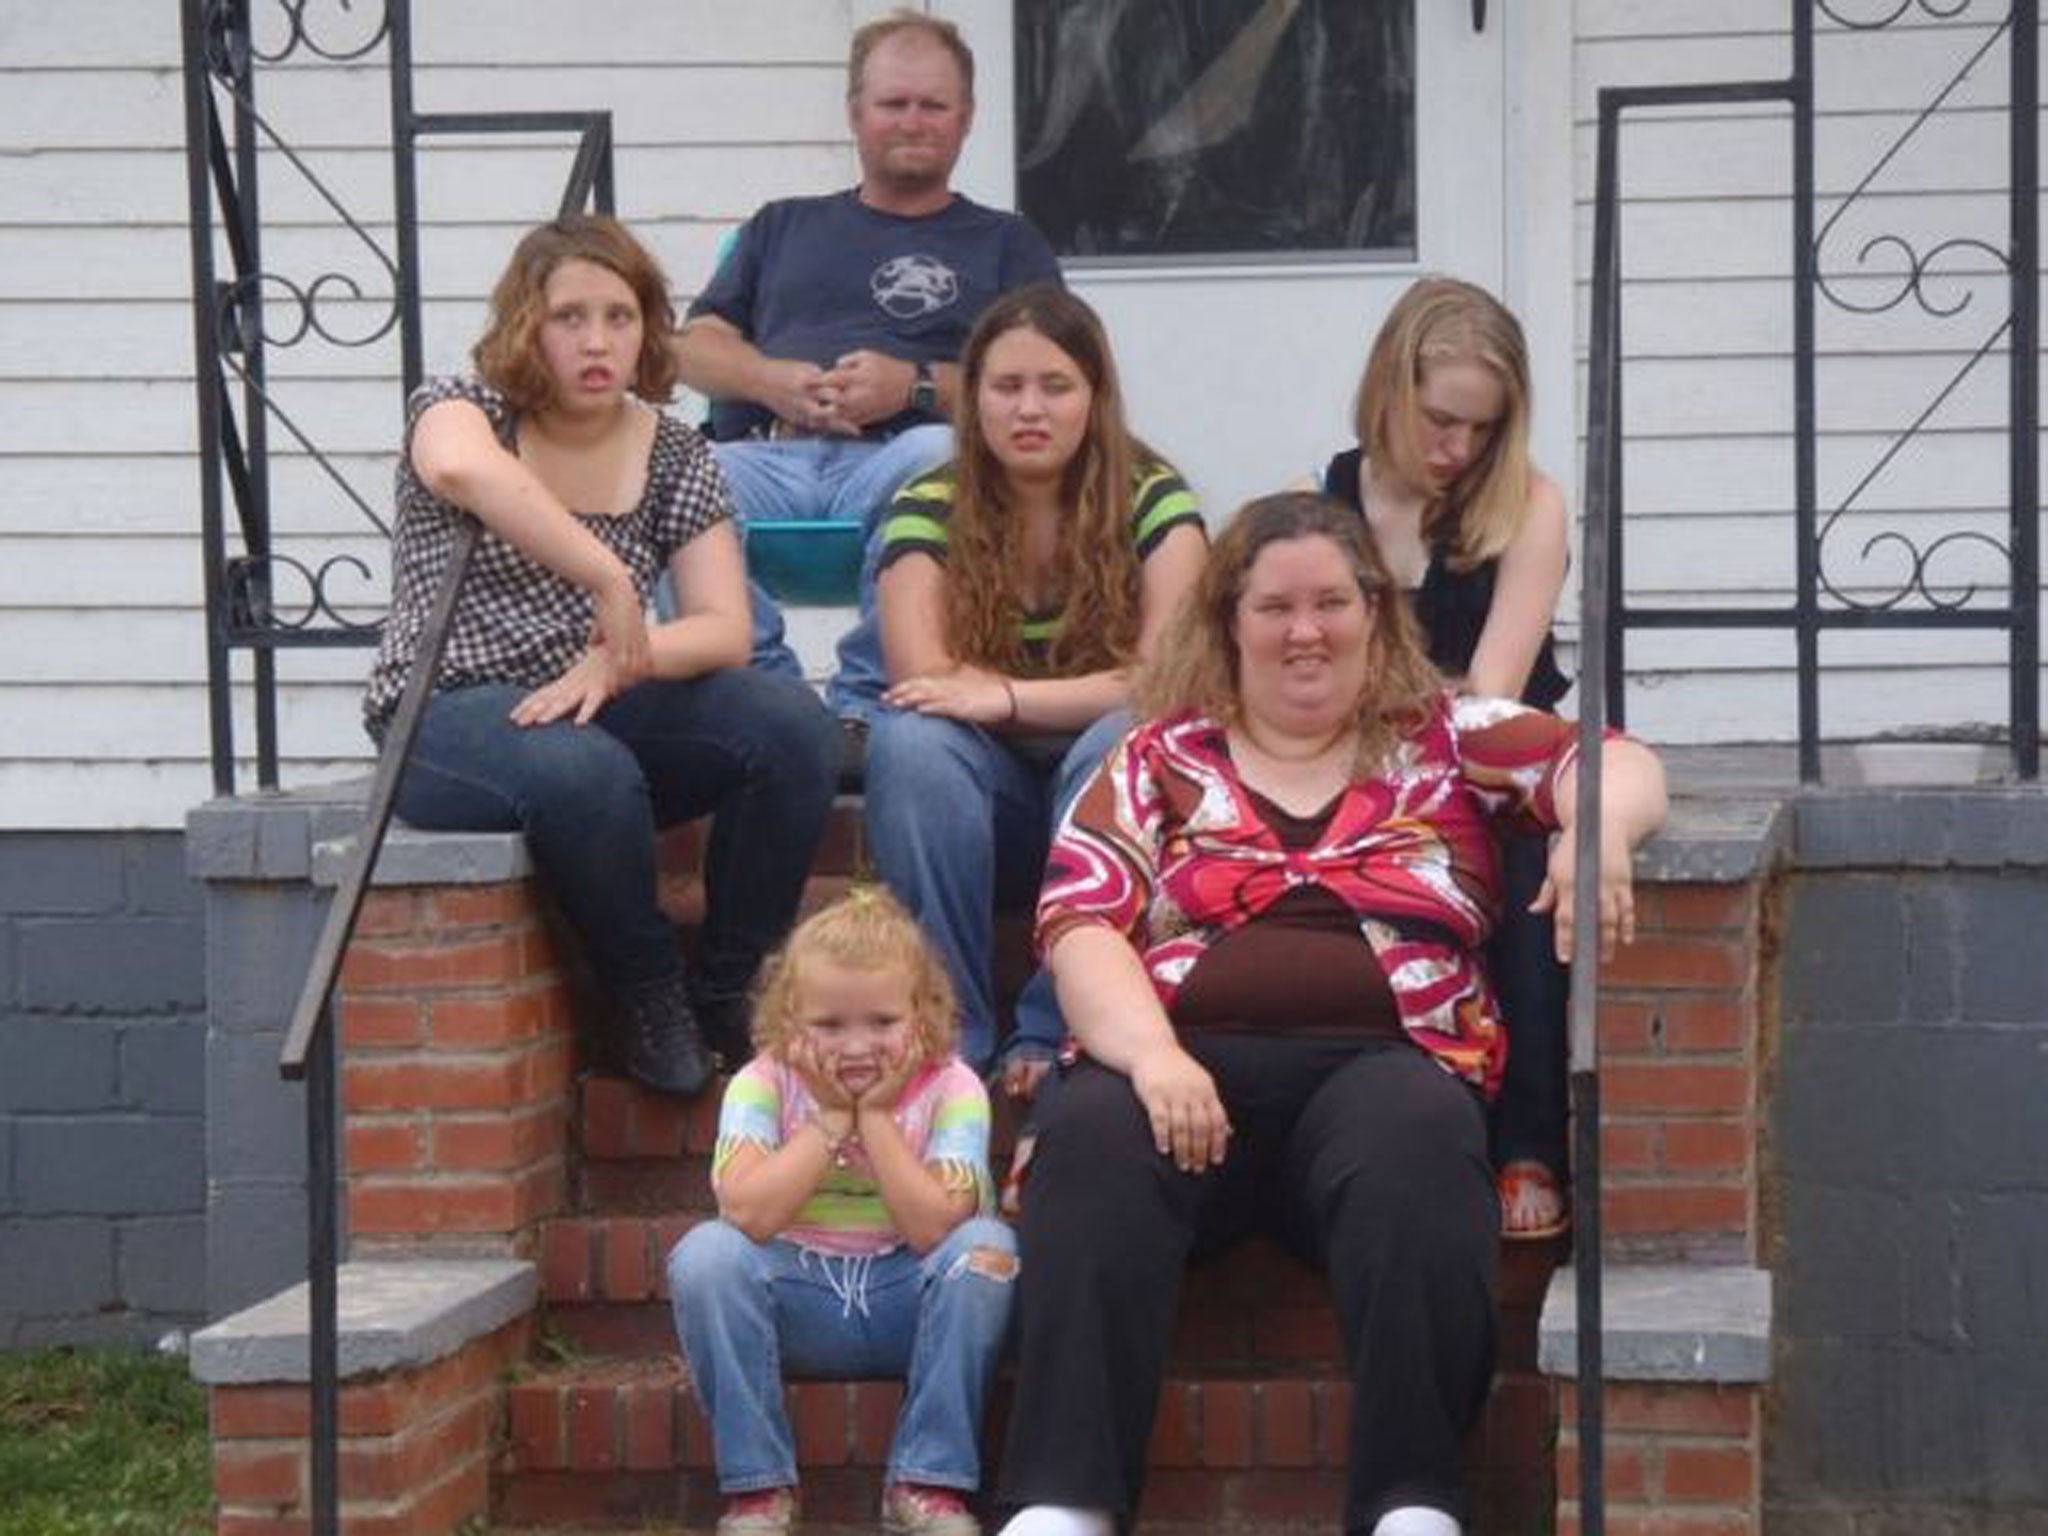 A big bit of TLC: Honey Boo Boo (front left) and family, from the American reality show